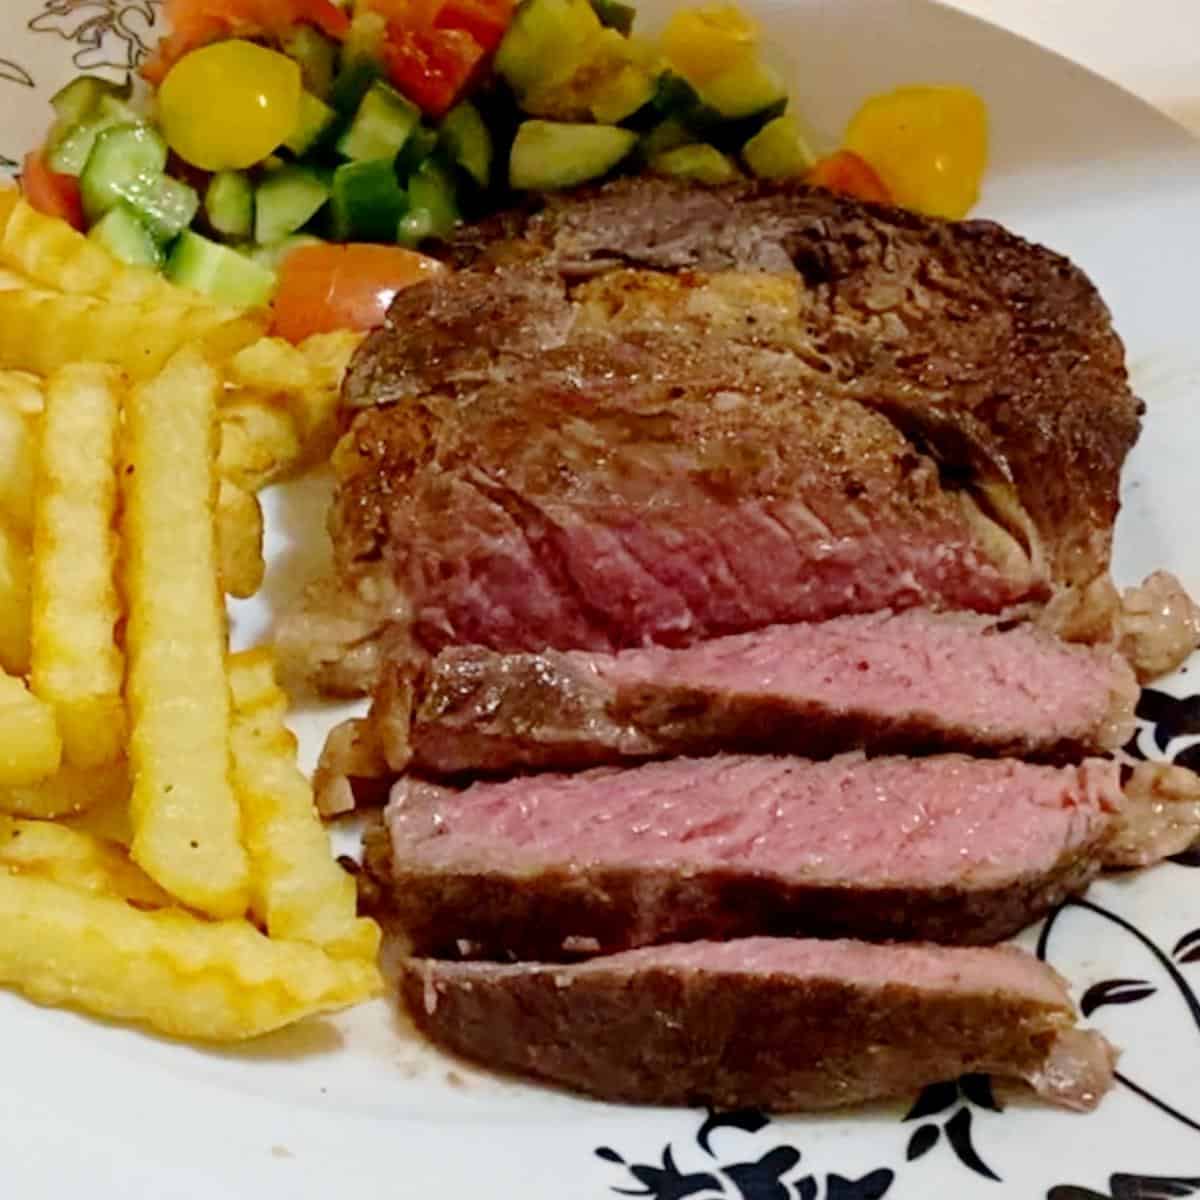 A plate with sliced steak fired and salad.